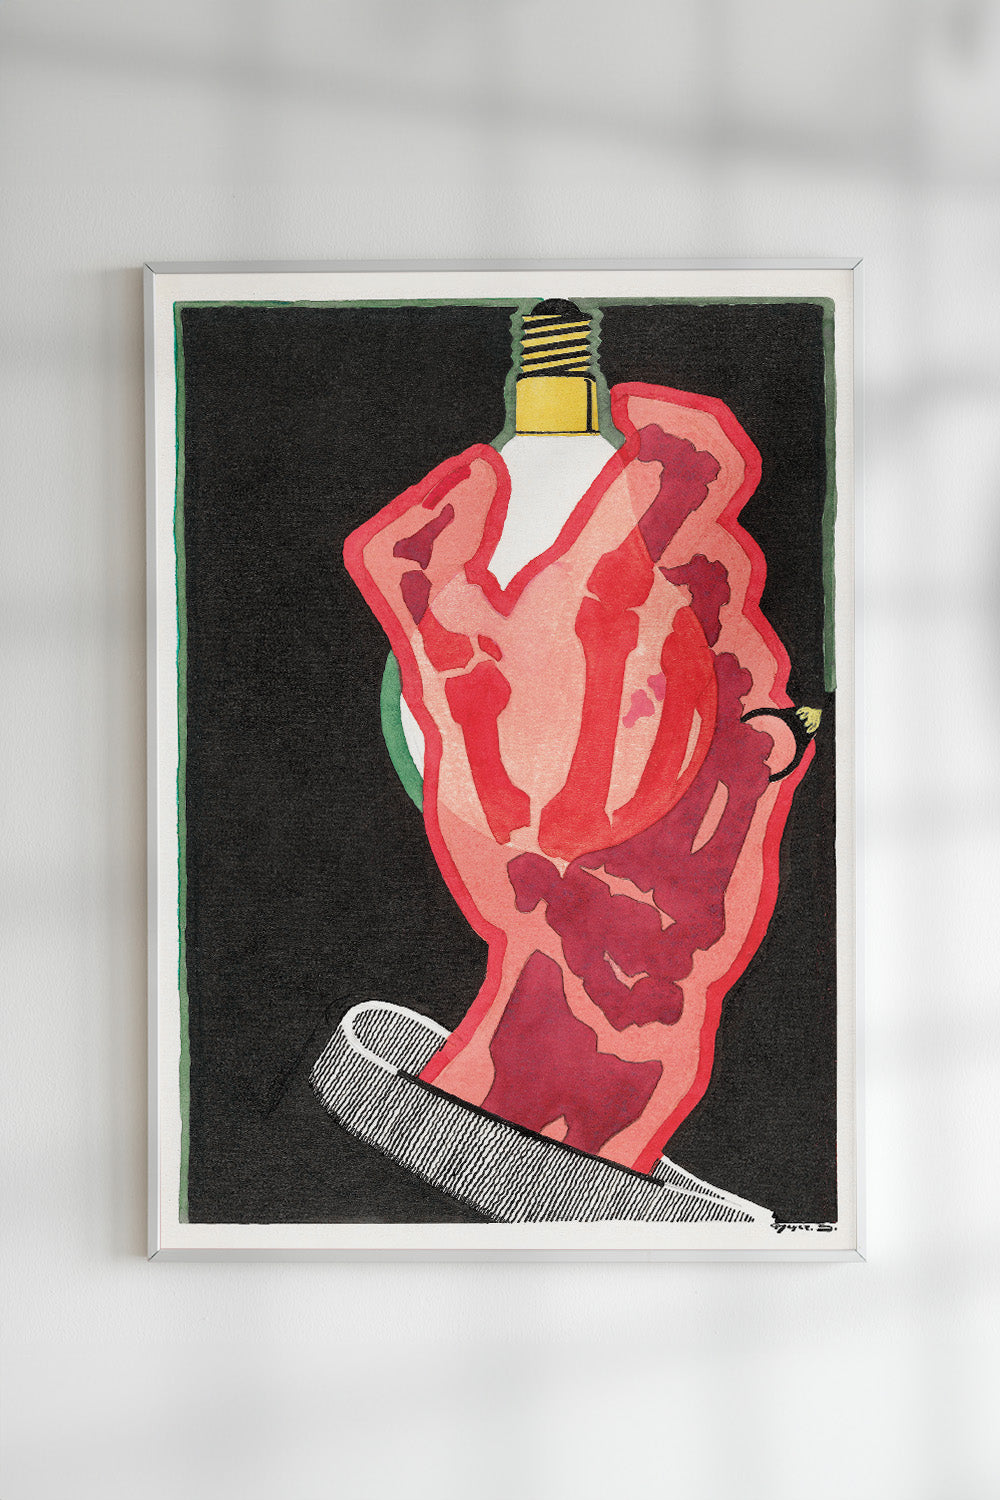 Vintage art of a translucent red hand screwing in a light bulb against a bold black background.